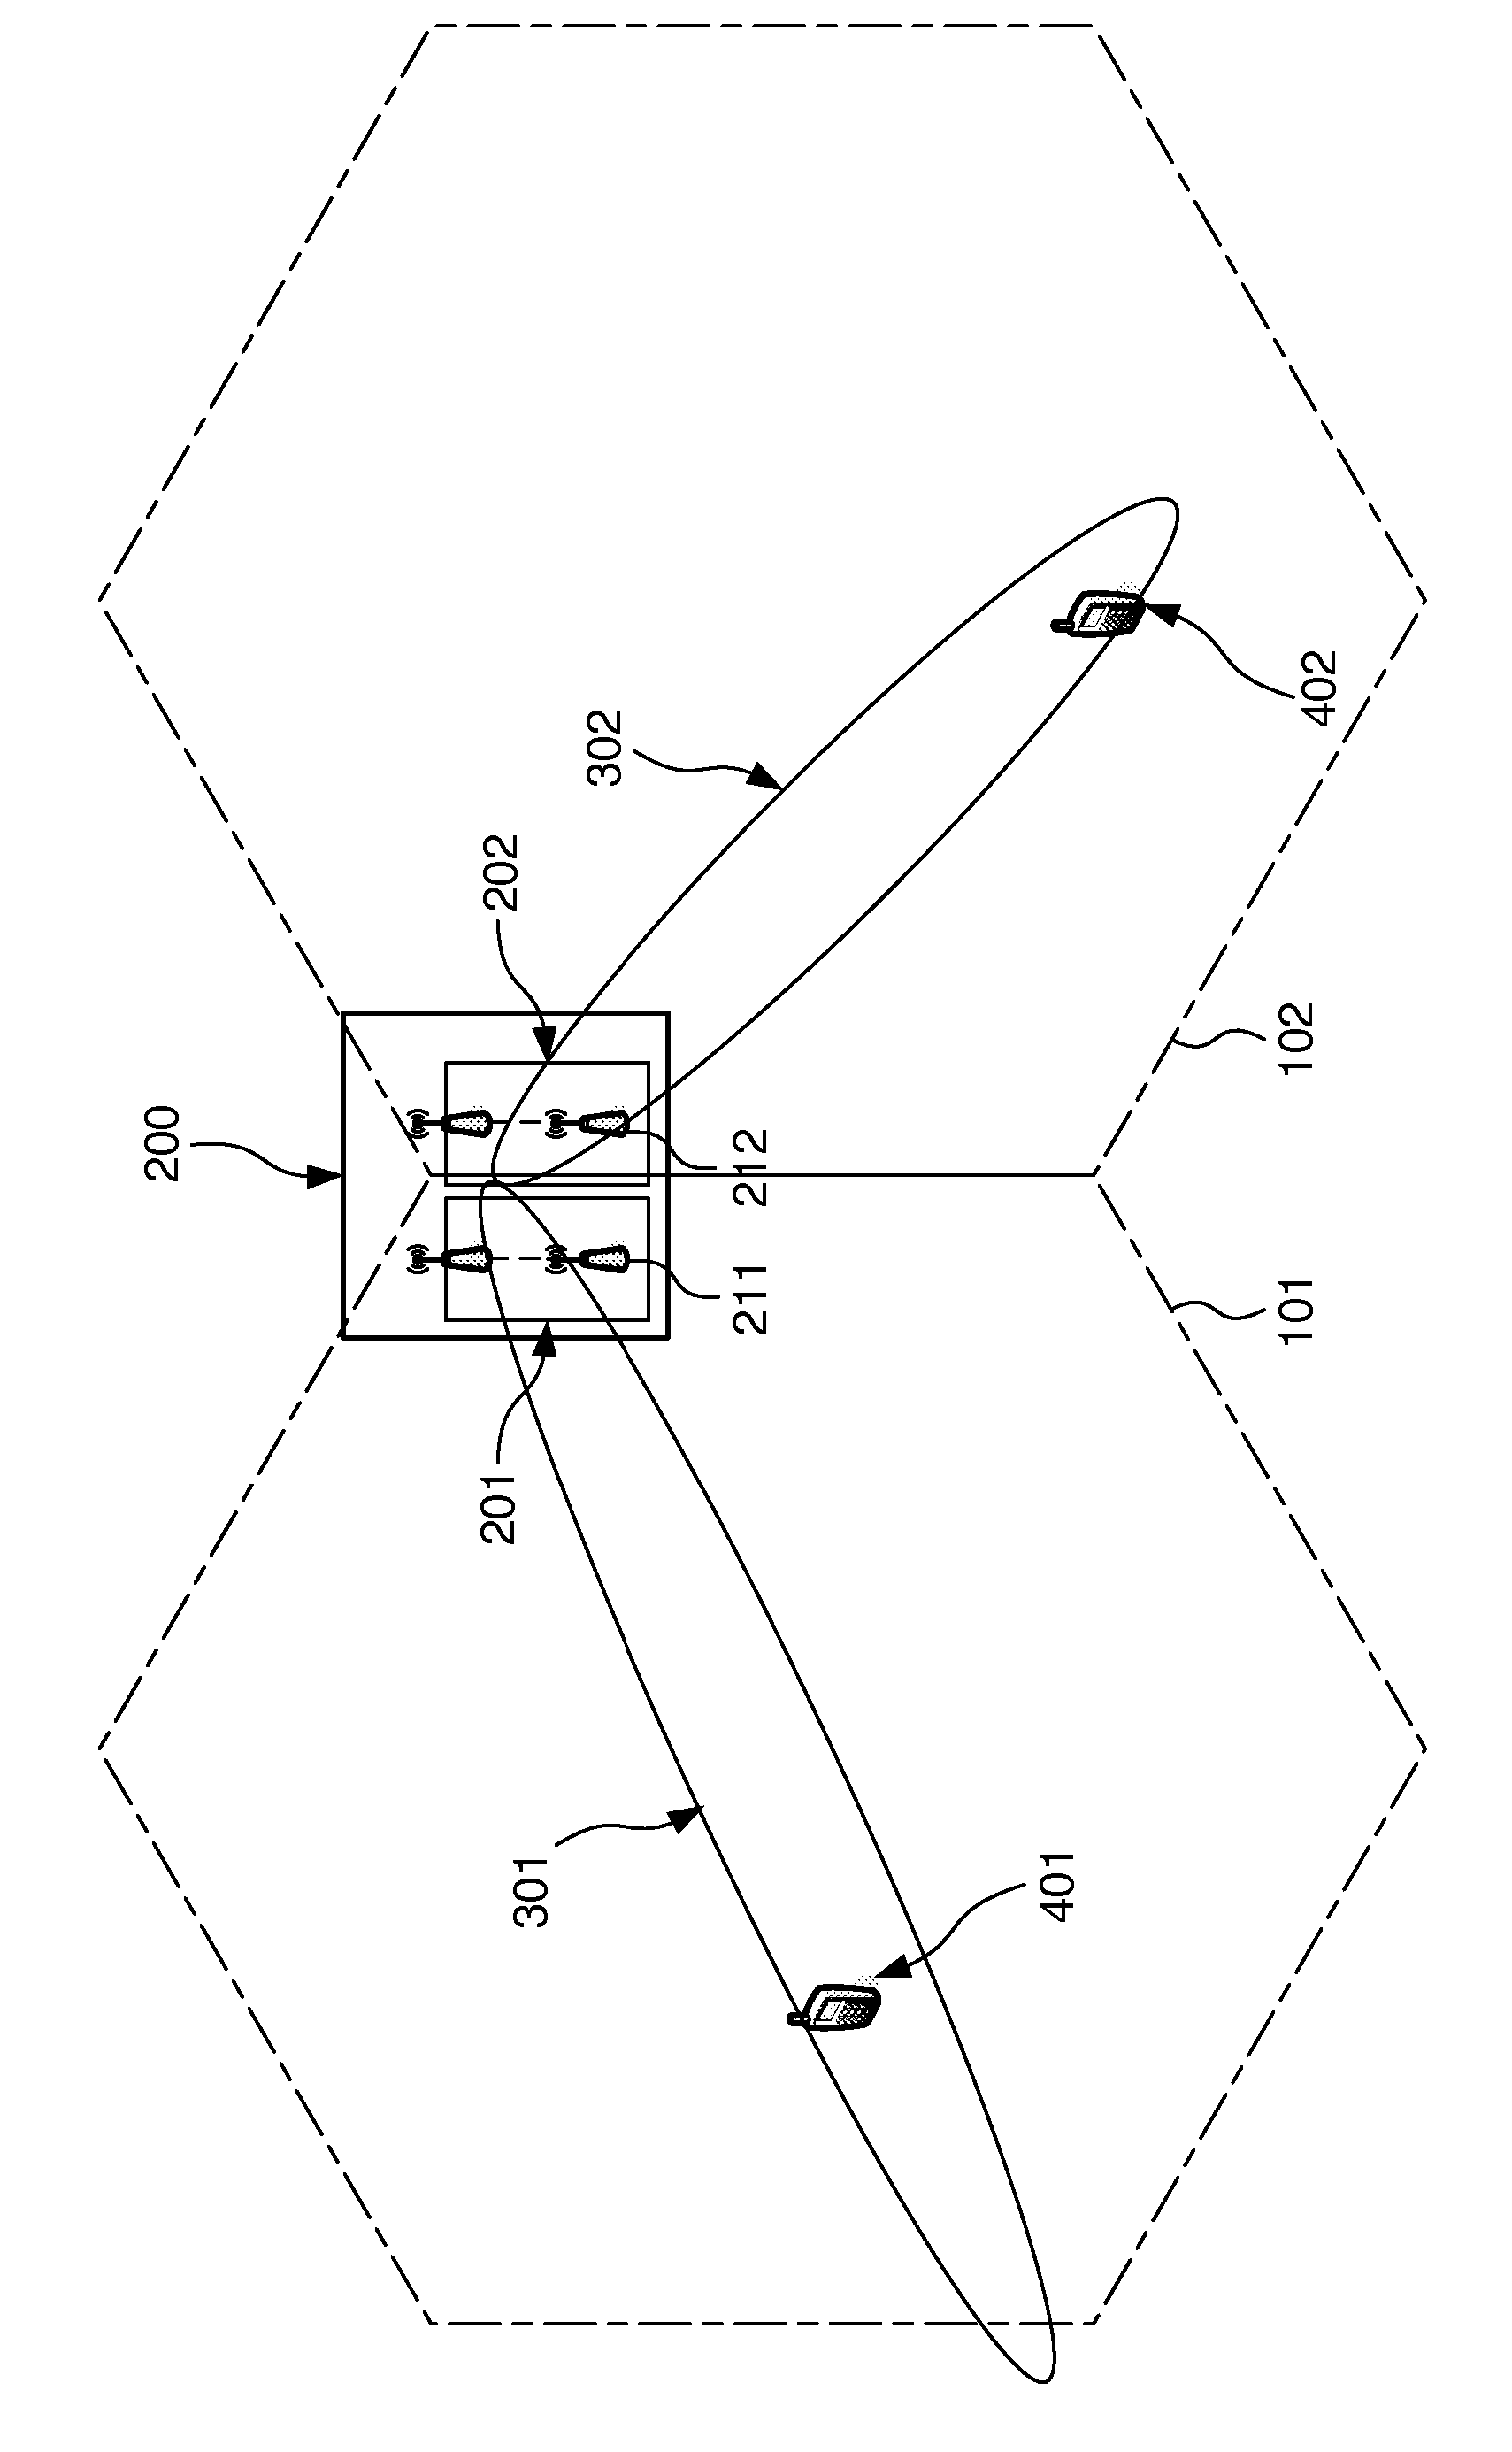 Antenna configuration for co-operative beamforming